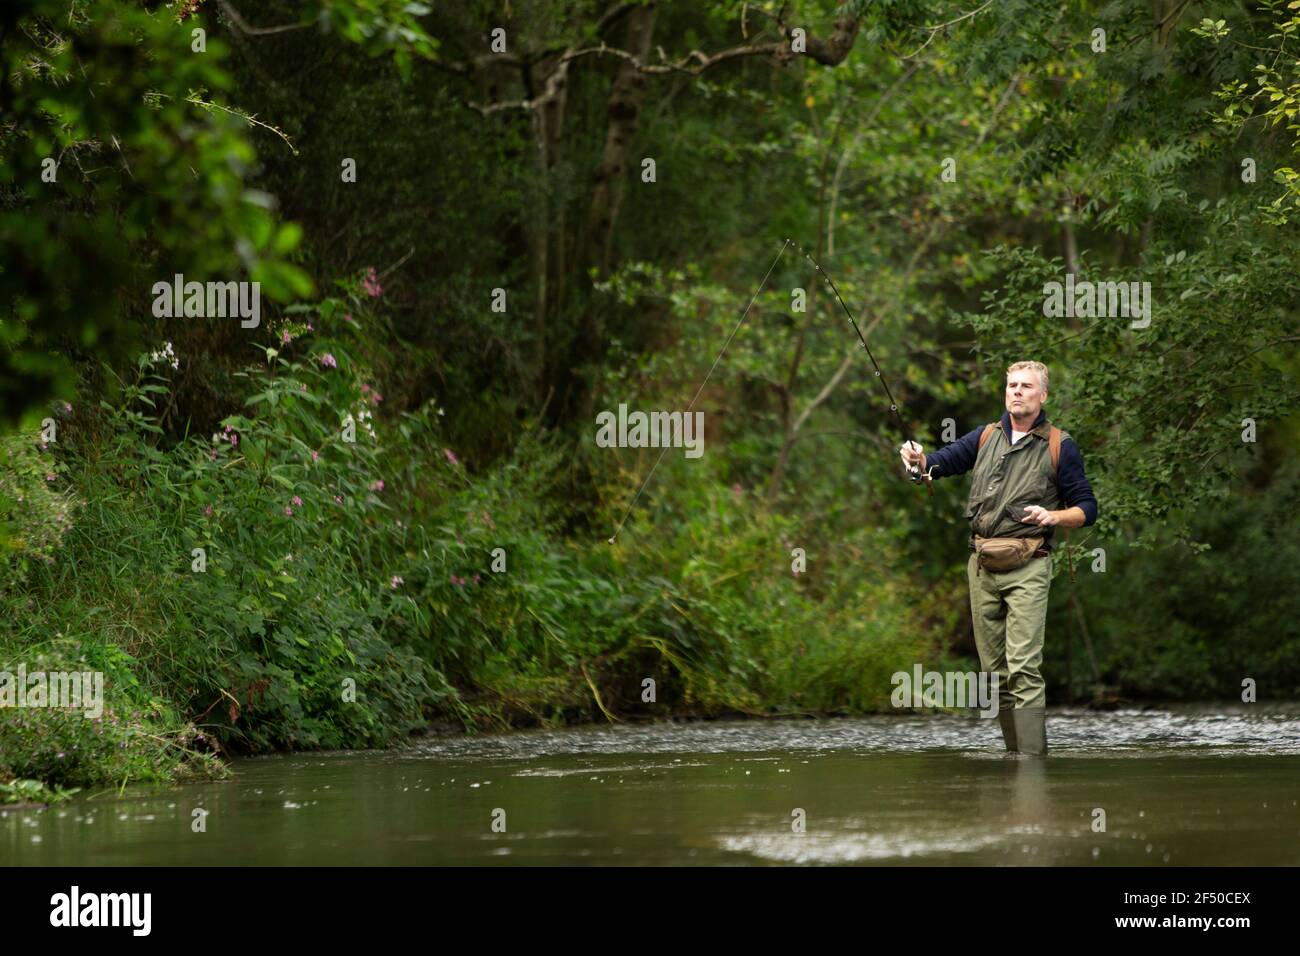 Man casting fly fishing rod in river Stock Photo